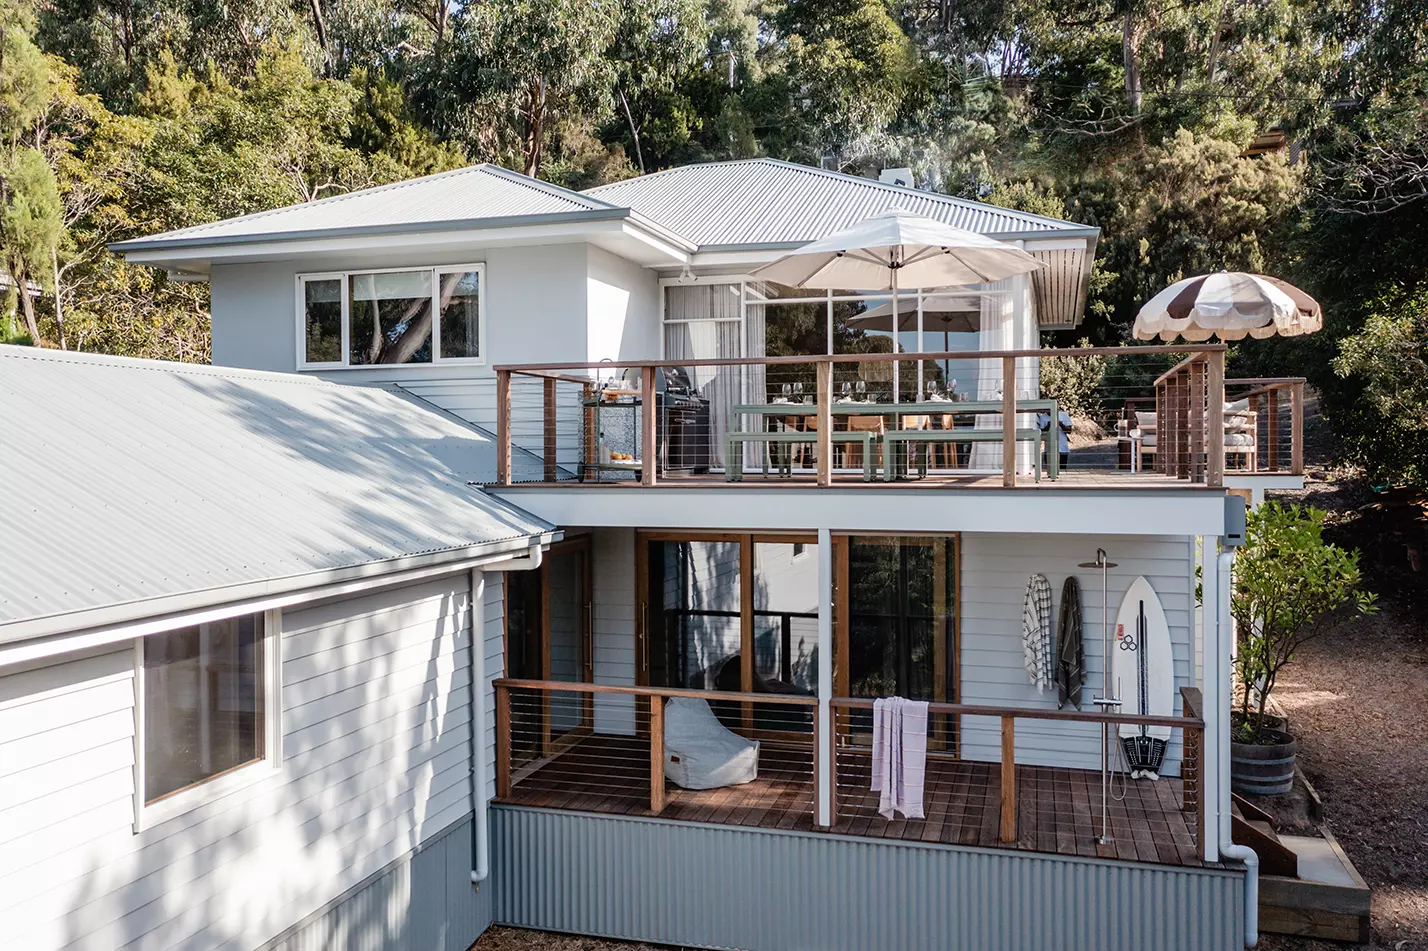 Exterior-Hunting-for-George-Reno-Goals-Lorne-Beach-House-DJI 0841